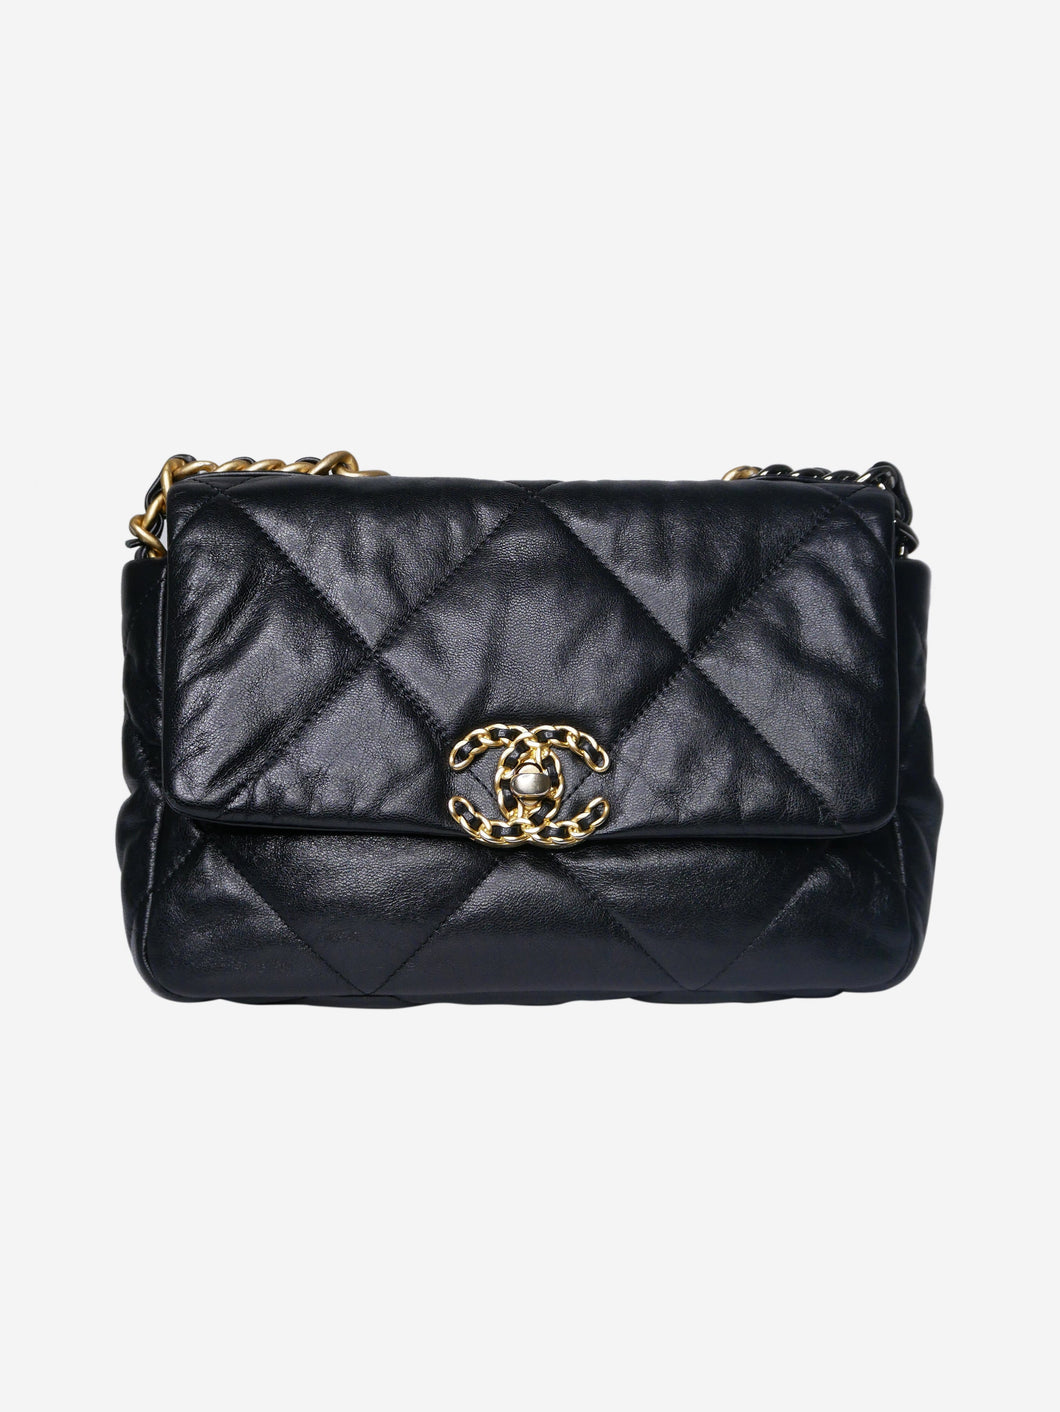 Black 2020 Chanel Pre-Owned quilted 19 shoulder bag with gold hardware